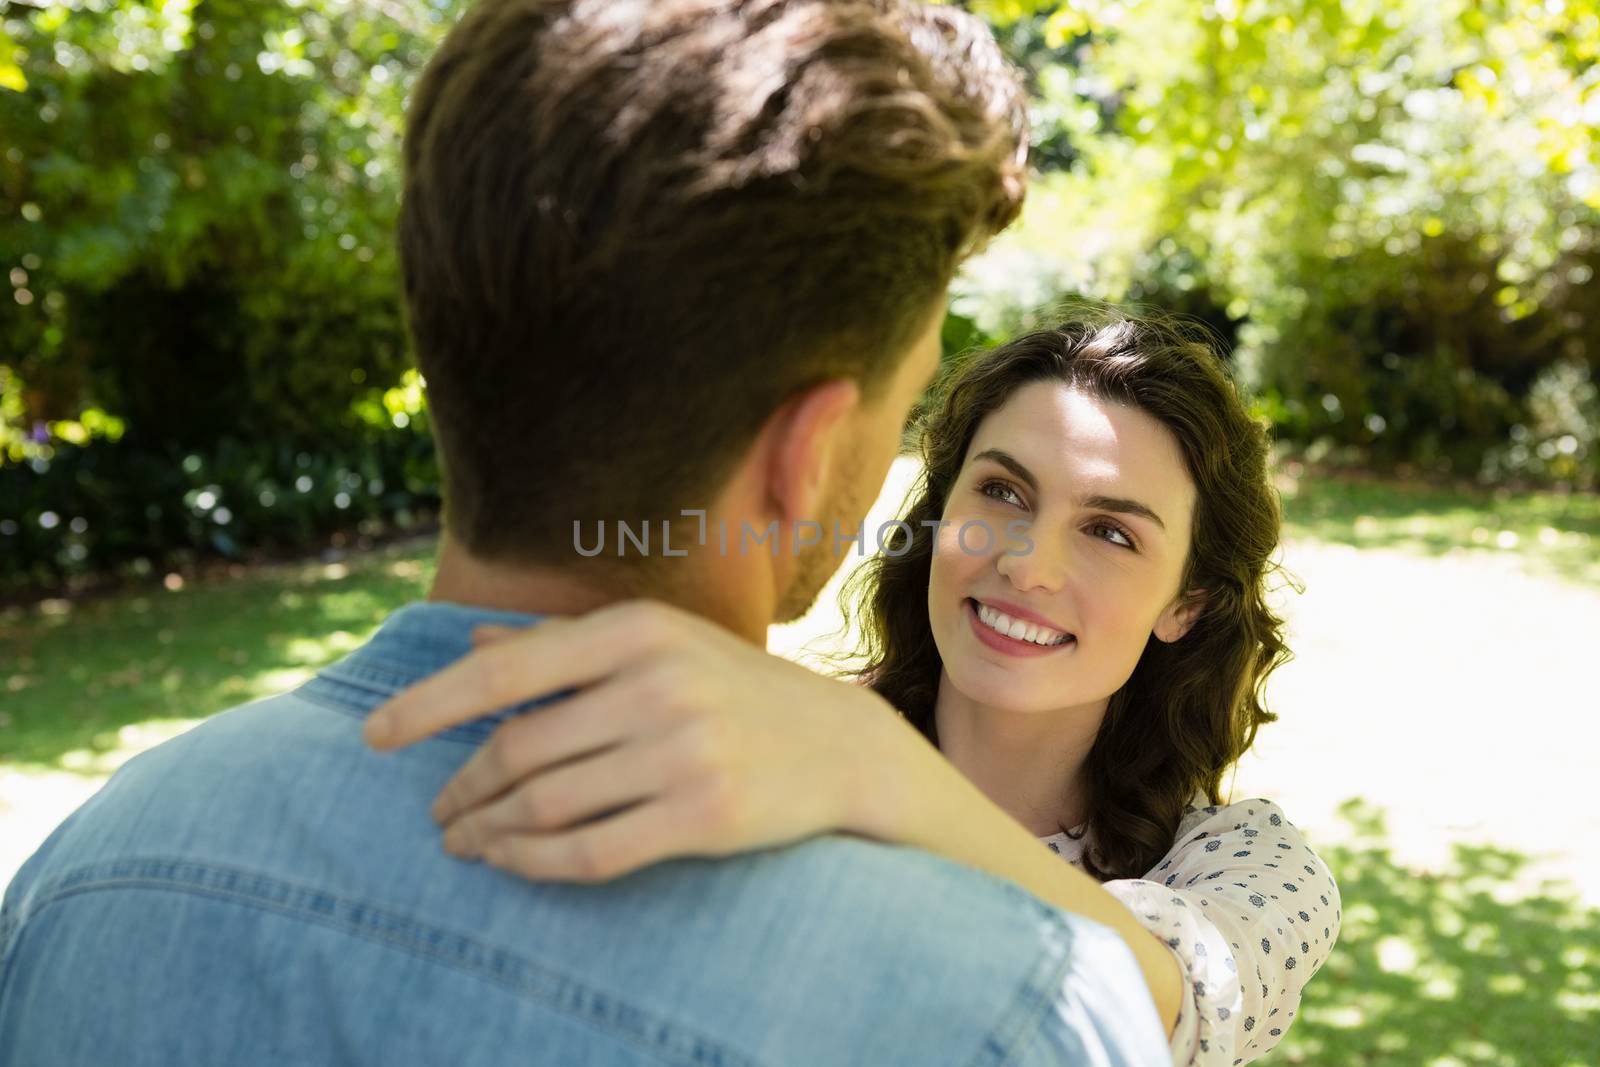 Romantic couple looking face to face in garden by Wavebreakmedia